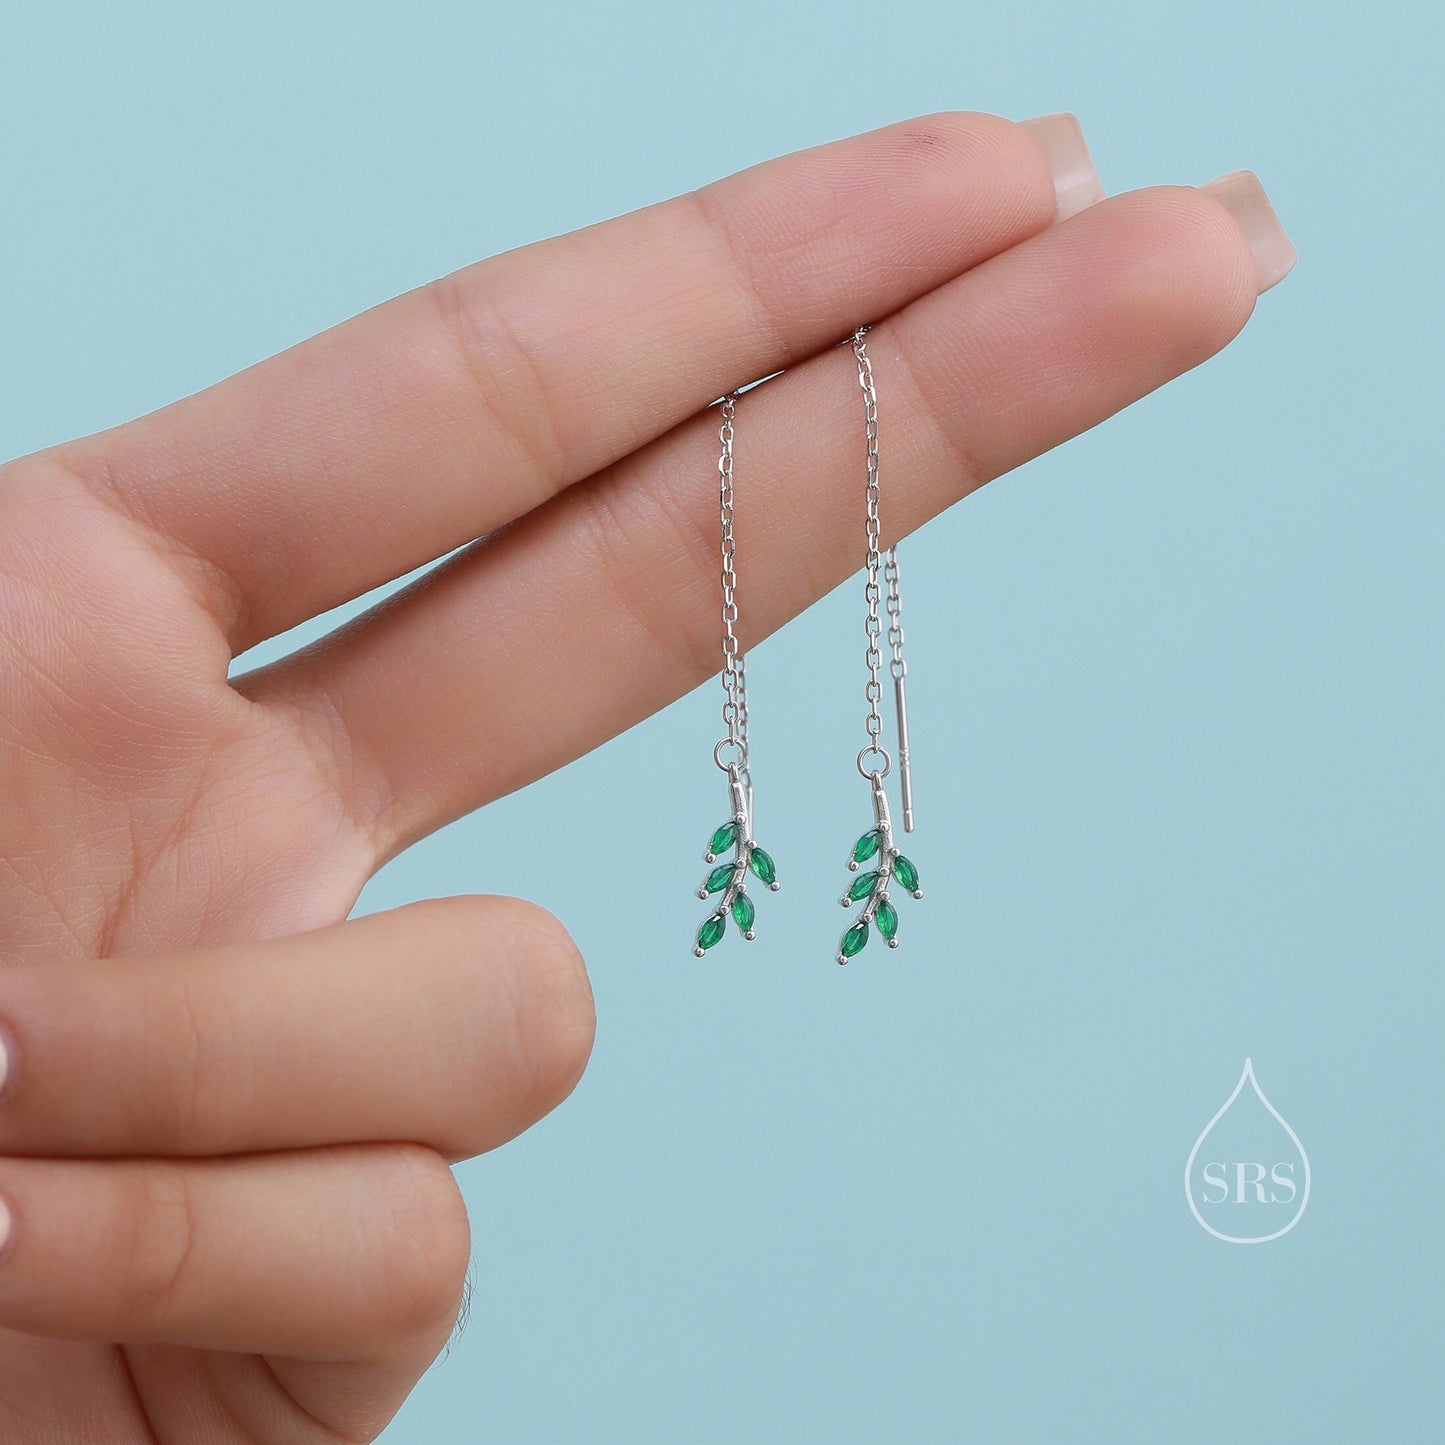 Delicate CZ Leaf Threader Earrings in Sterling Silver, Olive Branch Earrings, Silver or Gold, Clear CZ or Emerald Green, Long Threaders